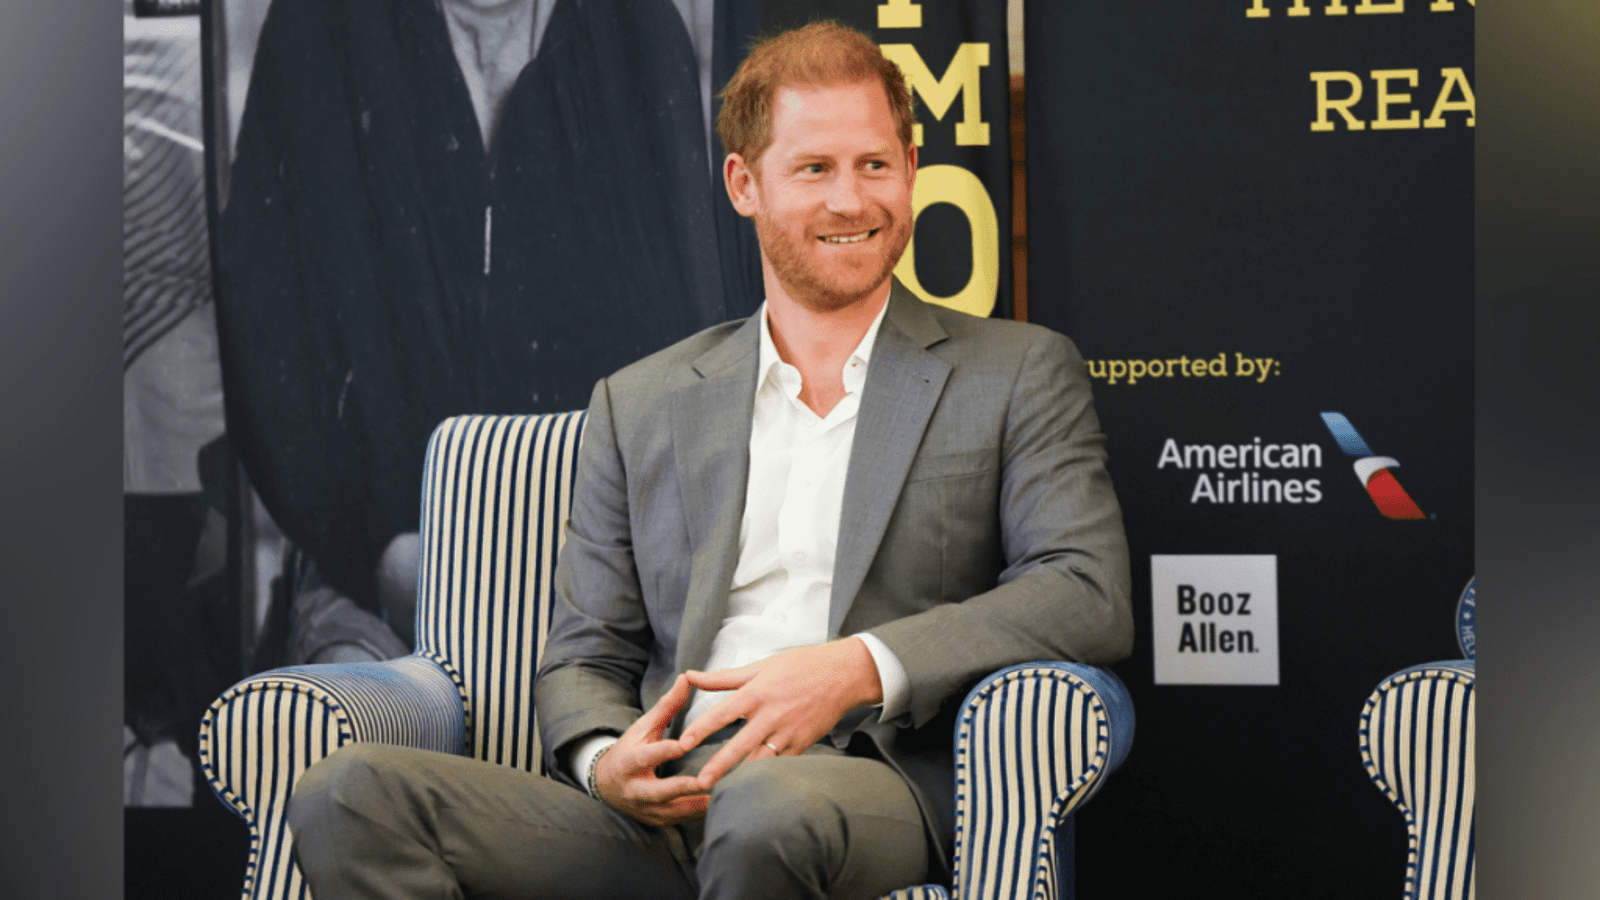 Prince Harry appears, alone, for UK Invictus Games service